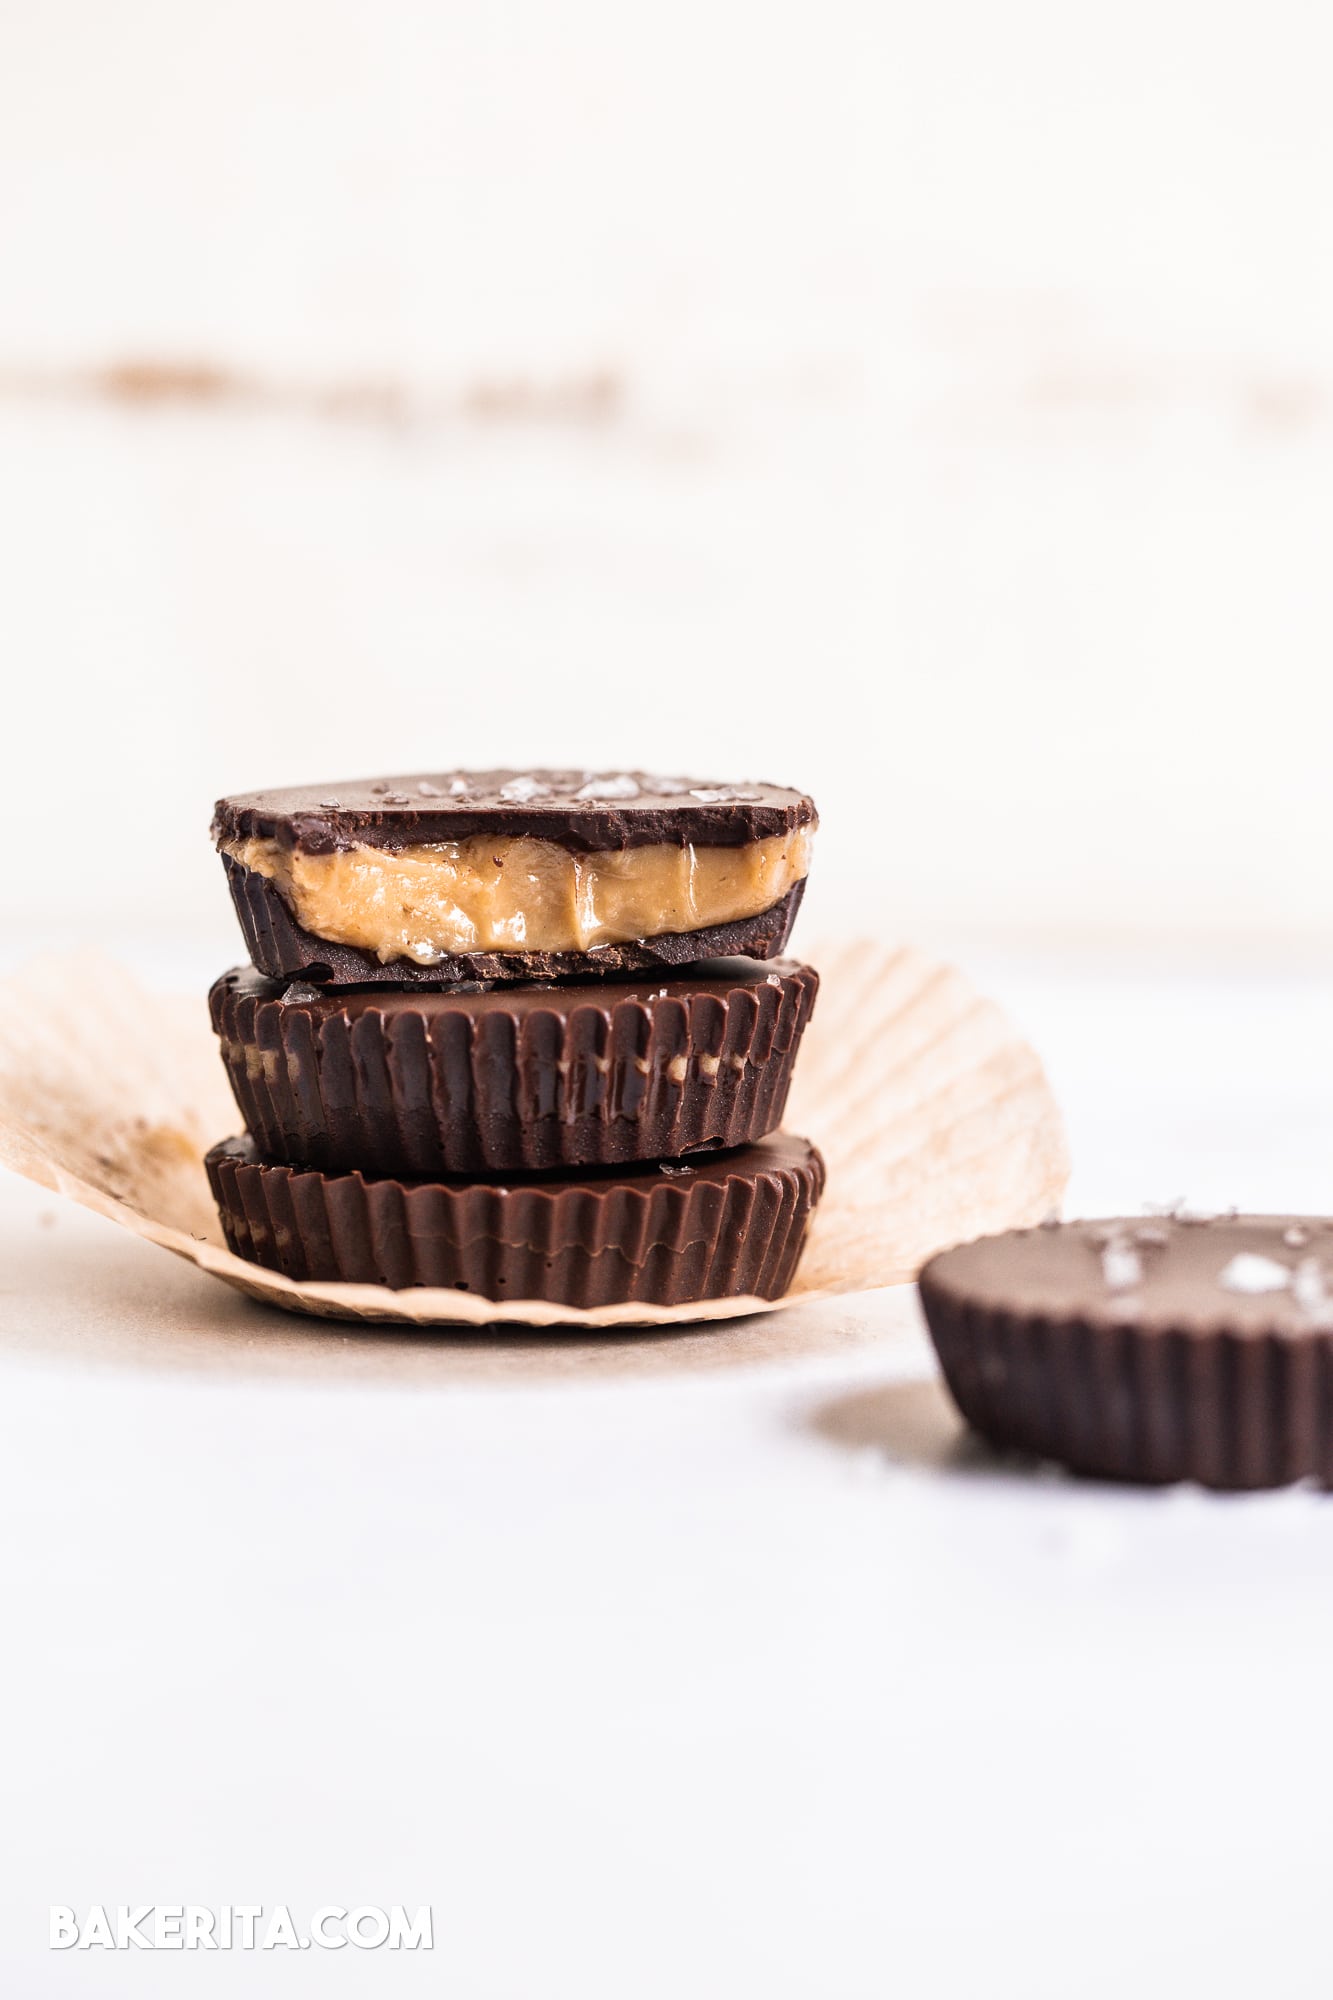 These Vegan Chocolate Peanut Butter Caramel Cups are made with homemade chocolate surrounding a gooey vegan peanut butter caramel. The six-ingredient recipe for these refined sugar-free treats is the perfect way to get your candy fix!